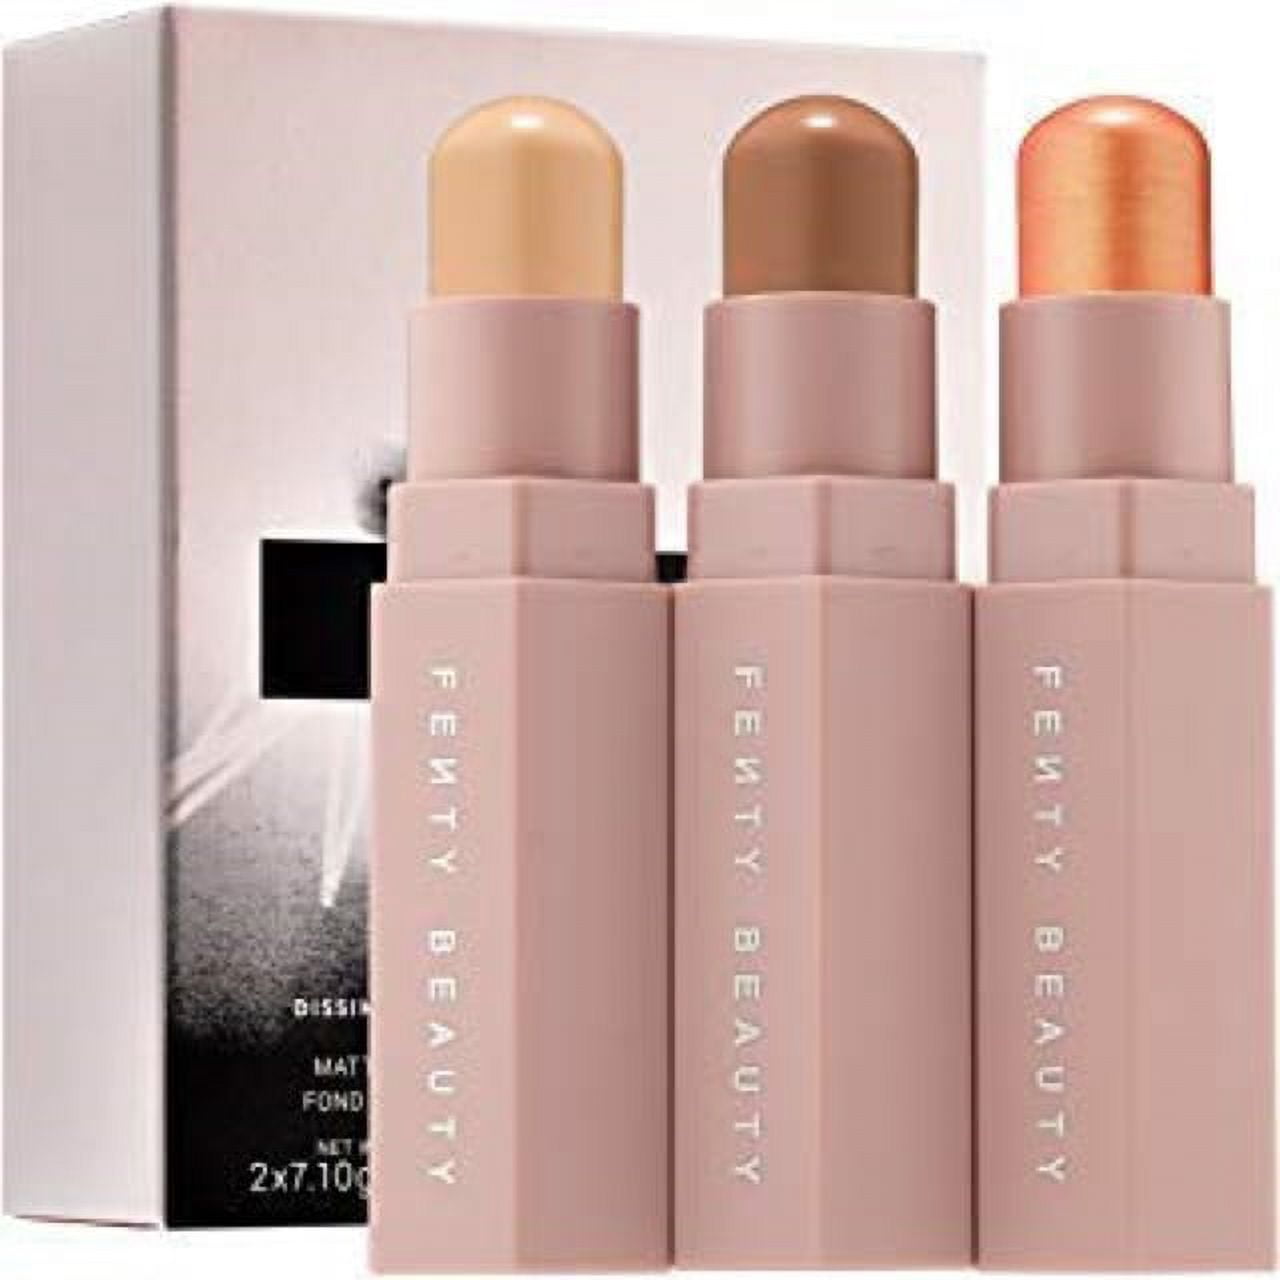 Fenty Beauty by Rihanna Match Stix Matte Skinstick 7.1g/0.25oz buy in  United States with free shipping CosmoStore